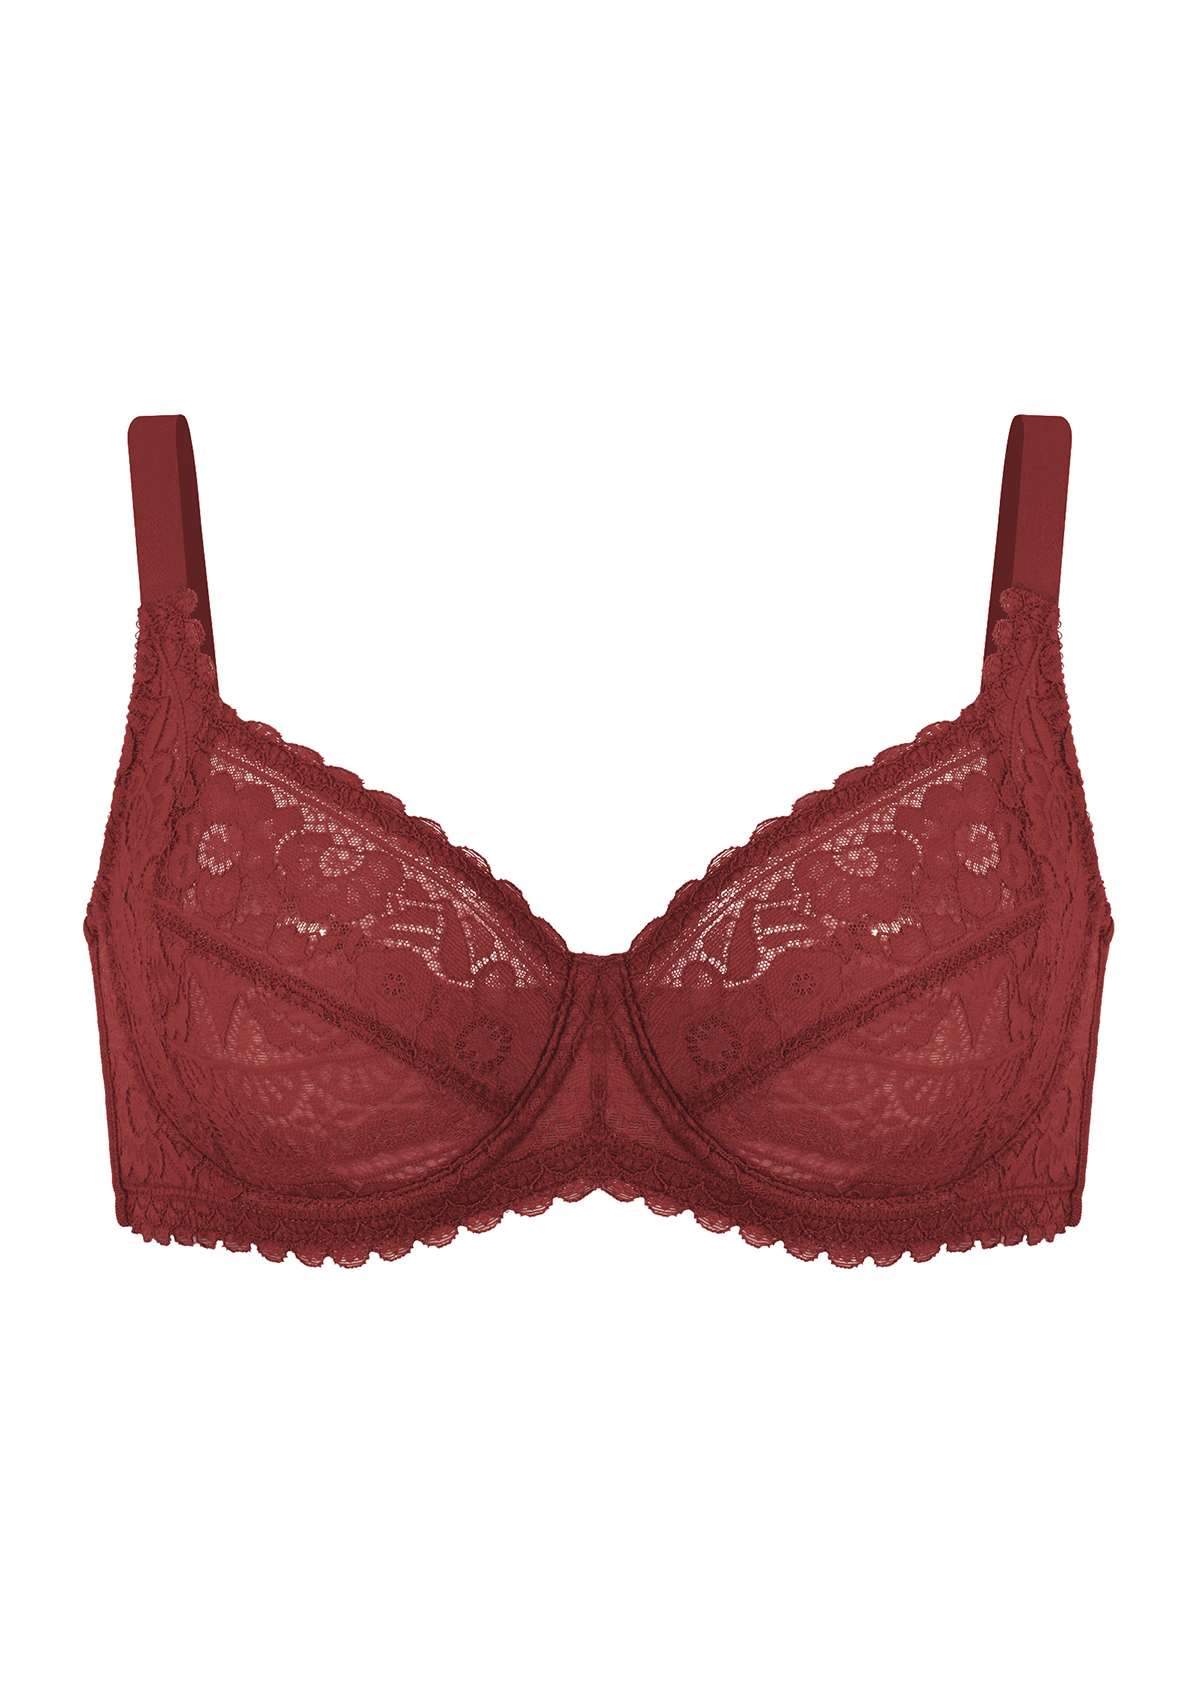 HSIA Freesia Unlined Lace Bra: Bra That Supports Back - Blue / 36 / D